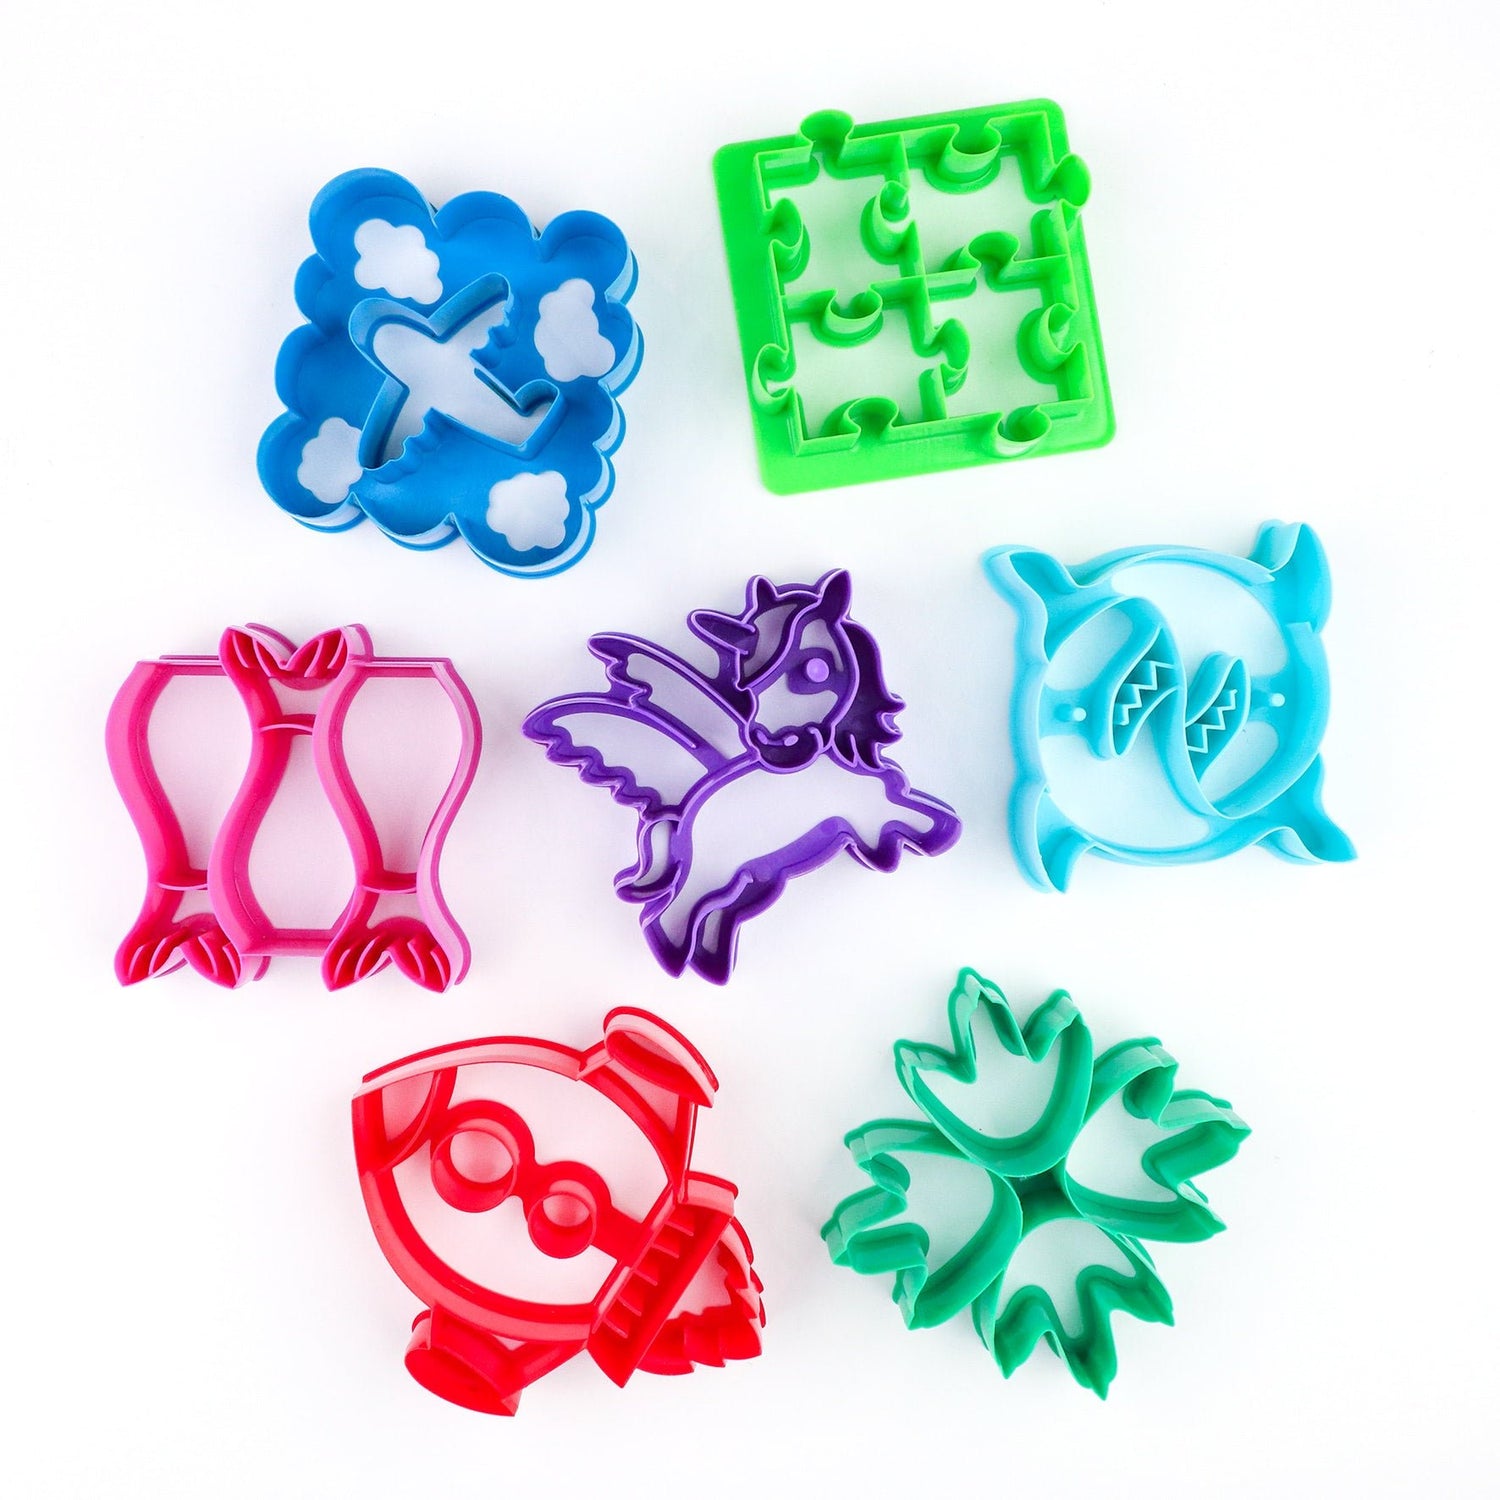 LUNCH PUNCH SANDWICH CUTTERS - TRANSIT by LUNCH PUNCH - The Playful Collective